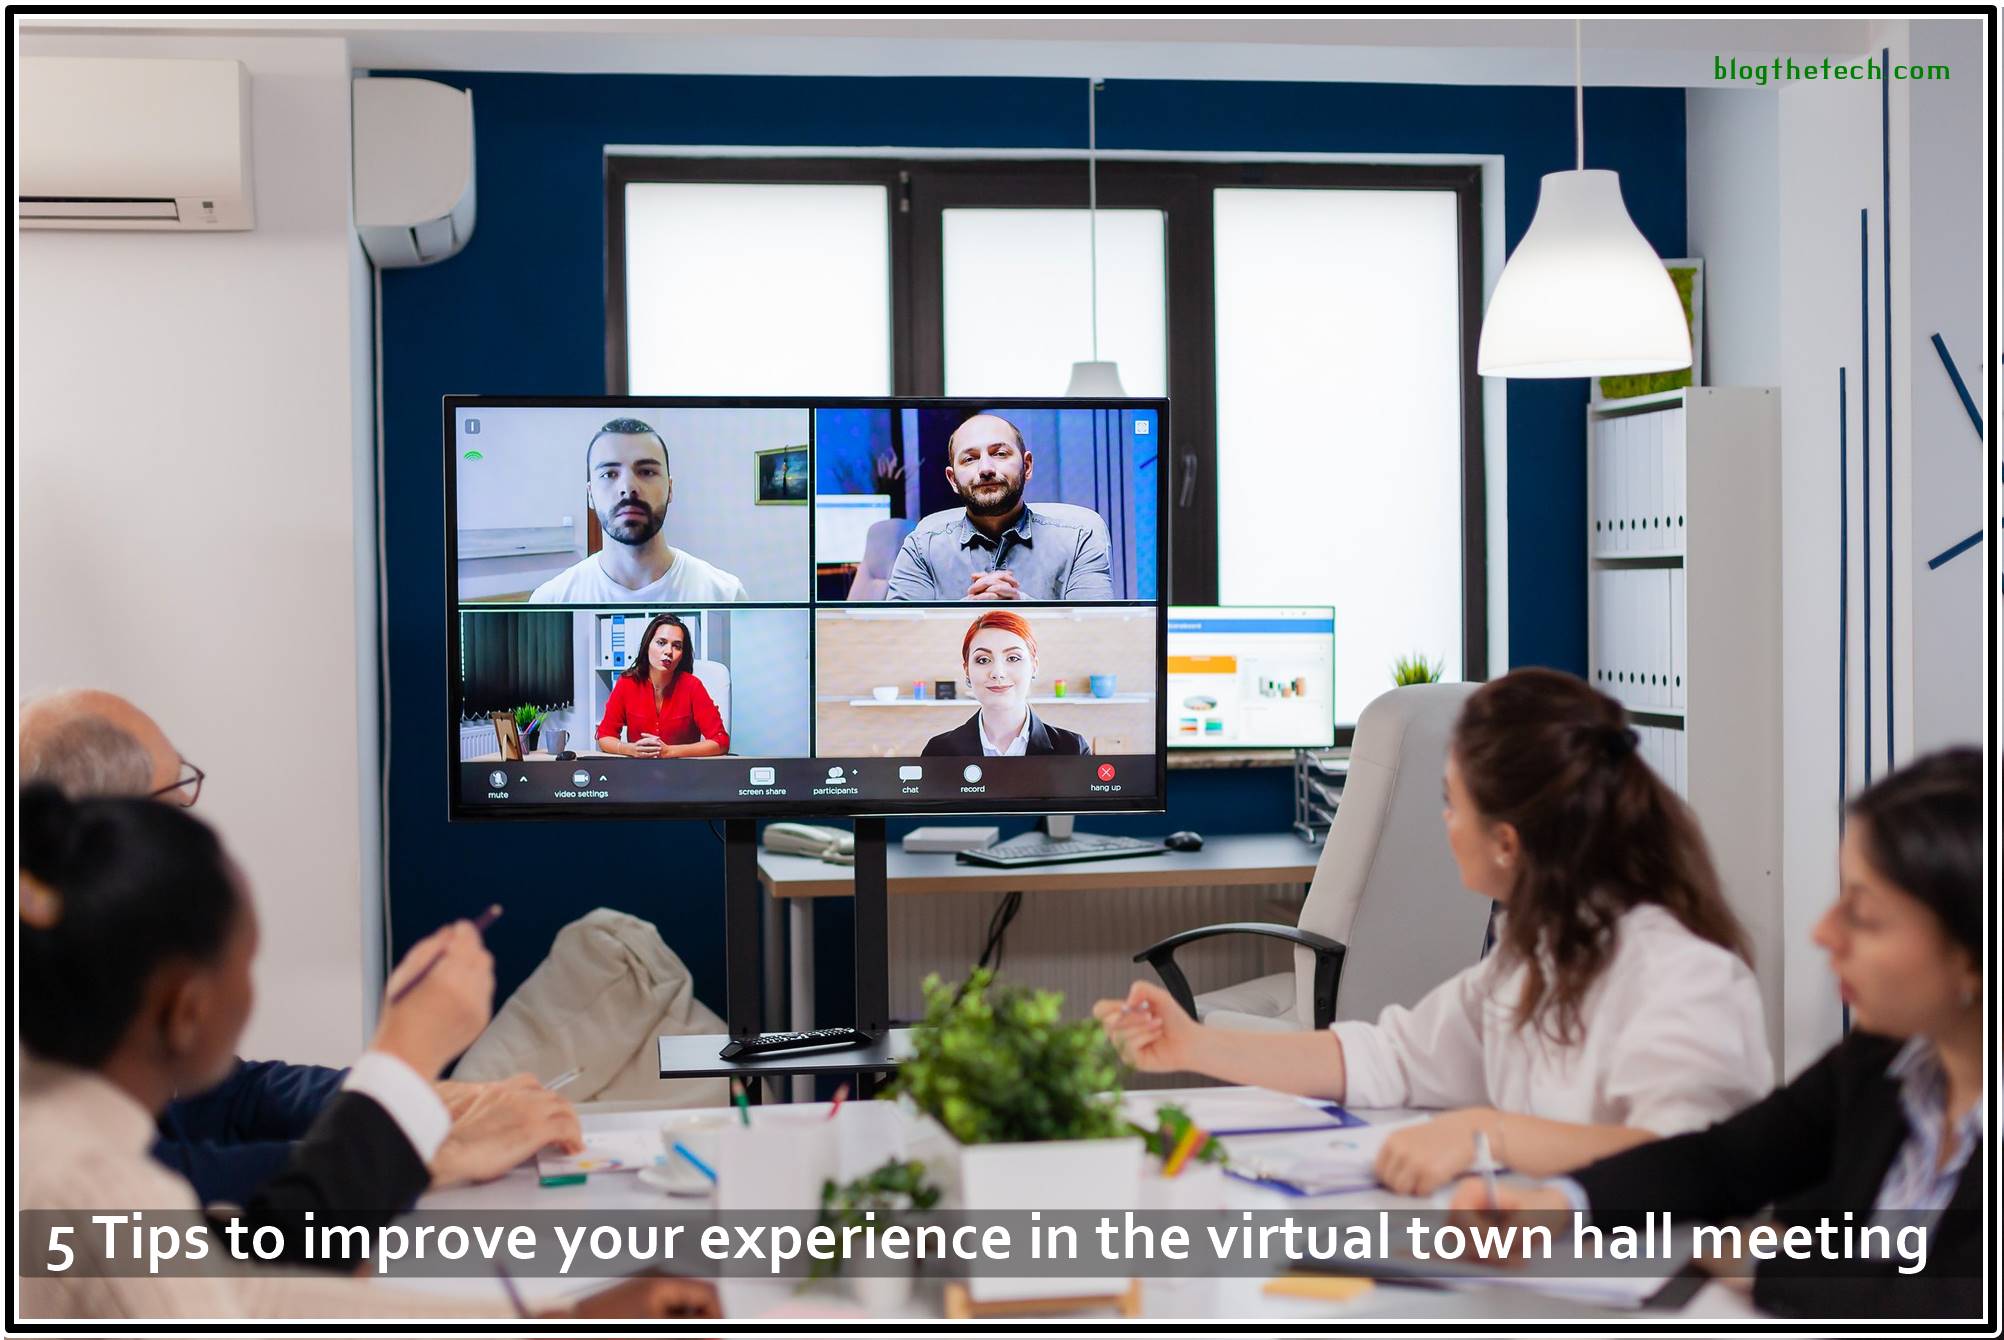 5 Tips to improve your experience in the virtual town hall meeting